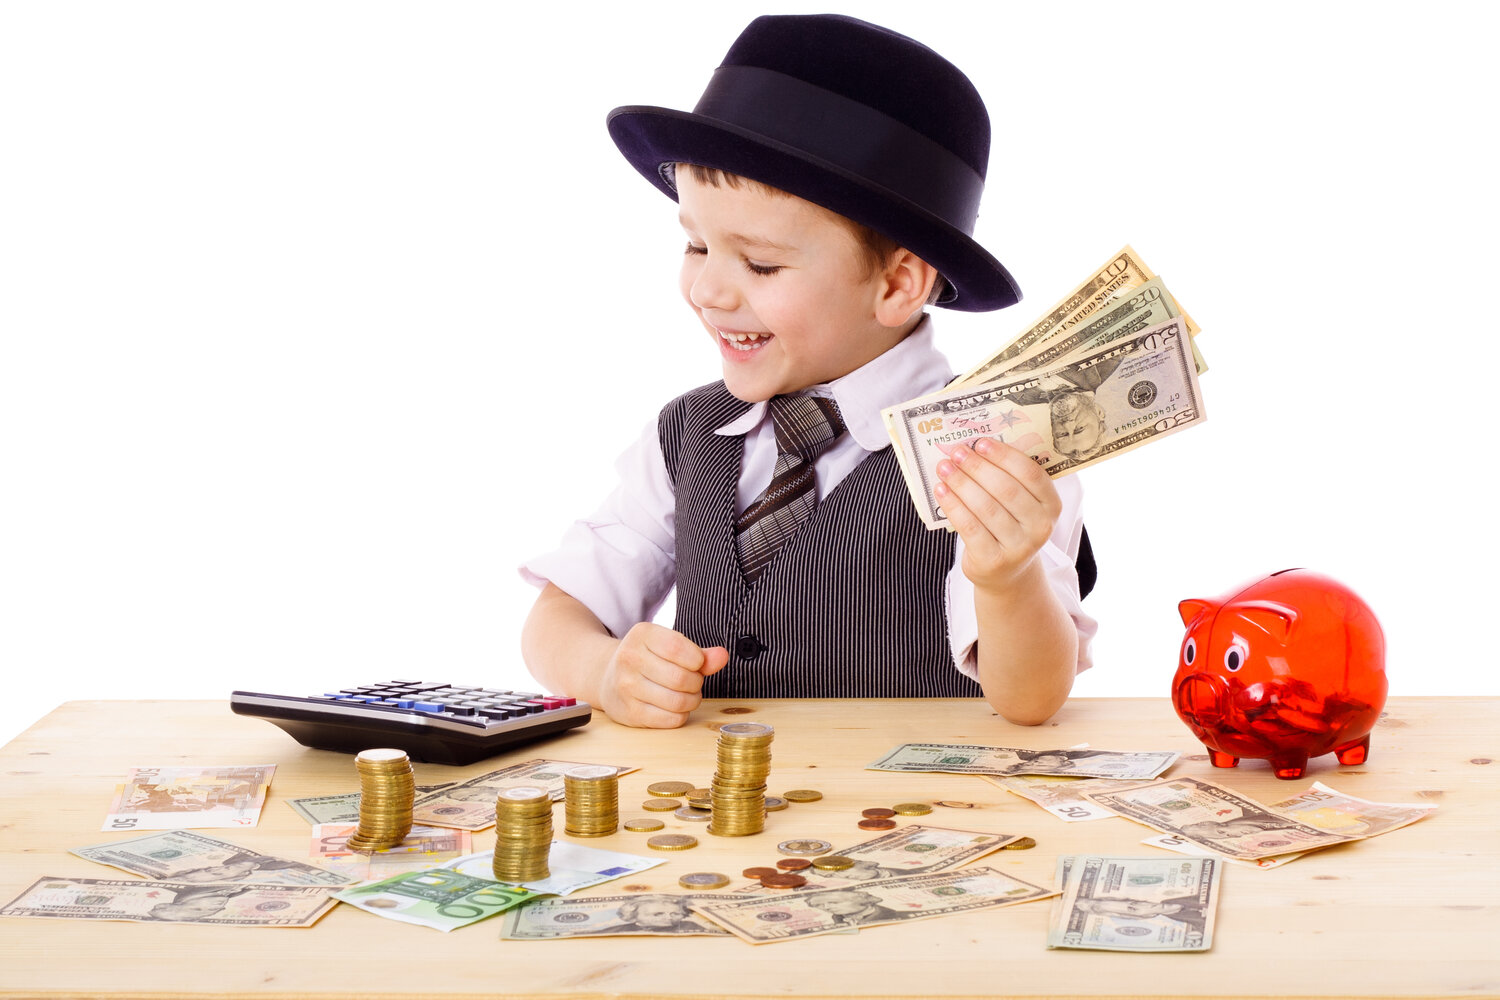 095 - Teaching Our Kids the Value of Money